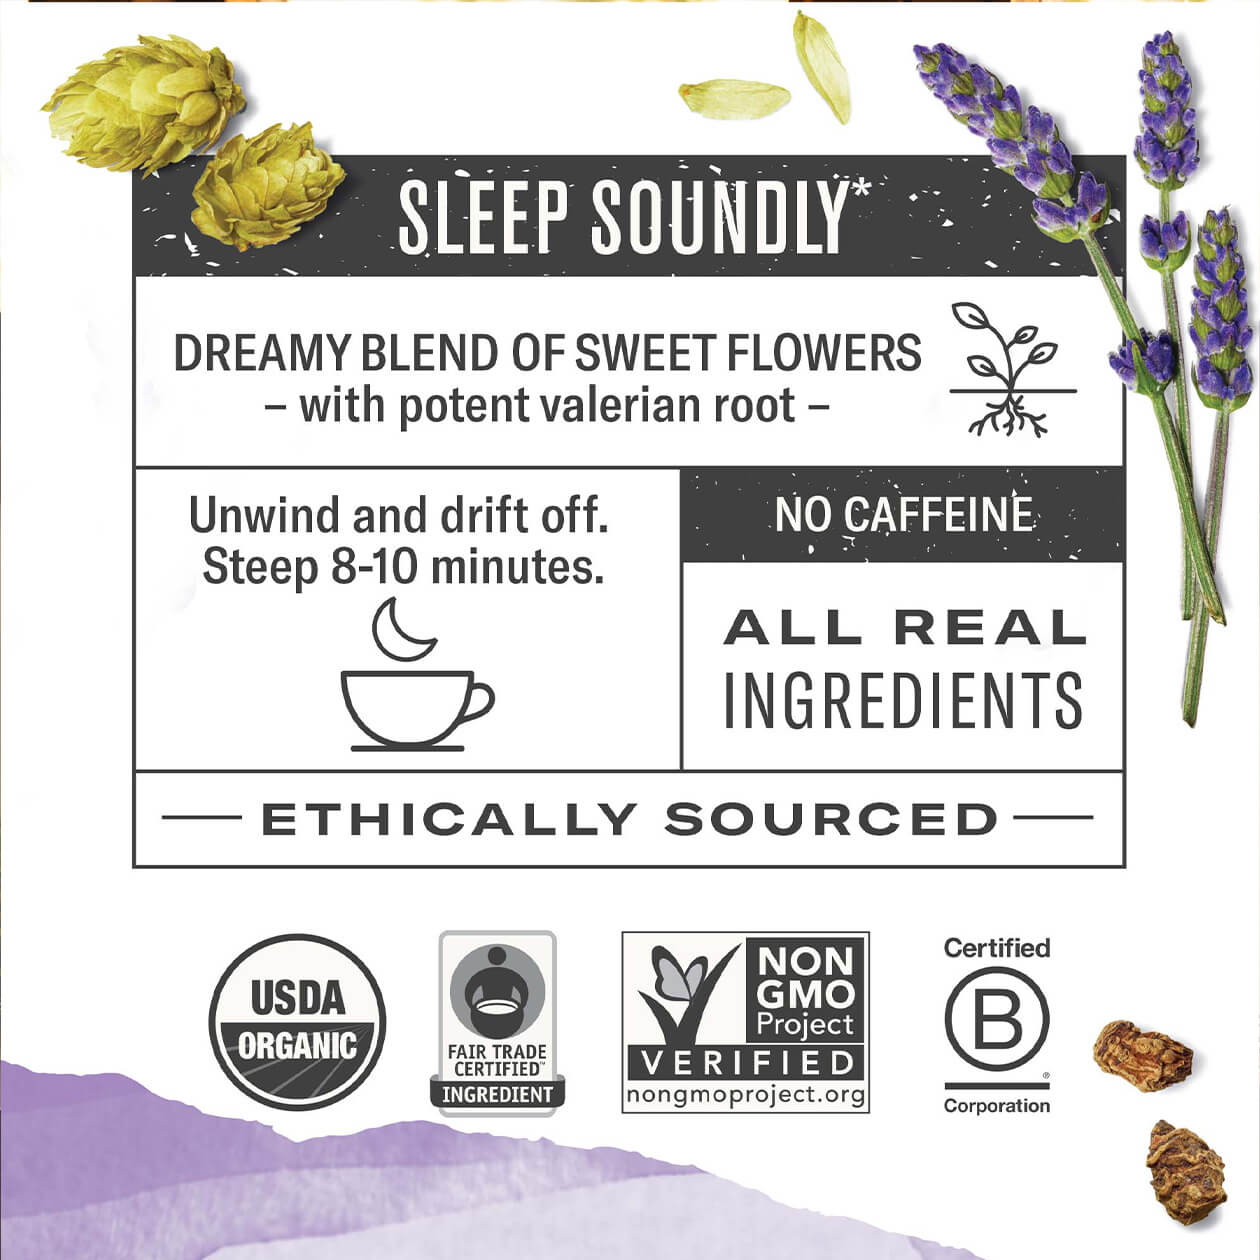 Infographic about Sweet Slumber: steep 8-10 minutes, caffeine free, all real ingredients, ethically sourced